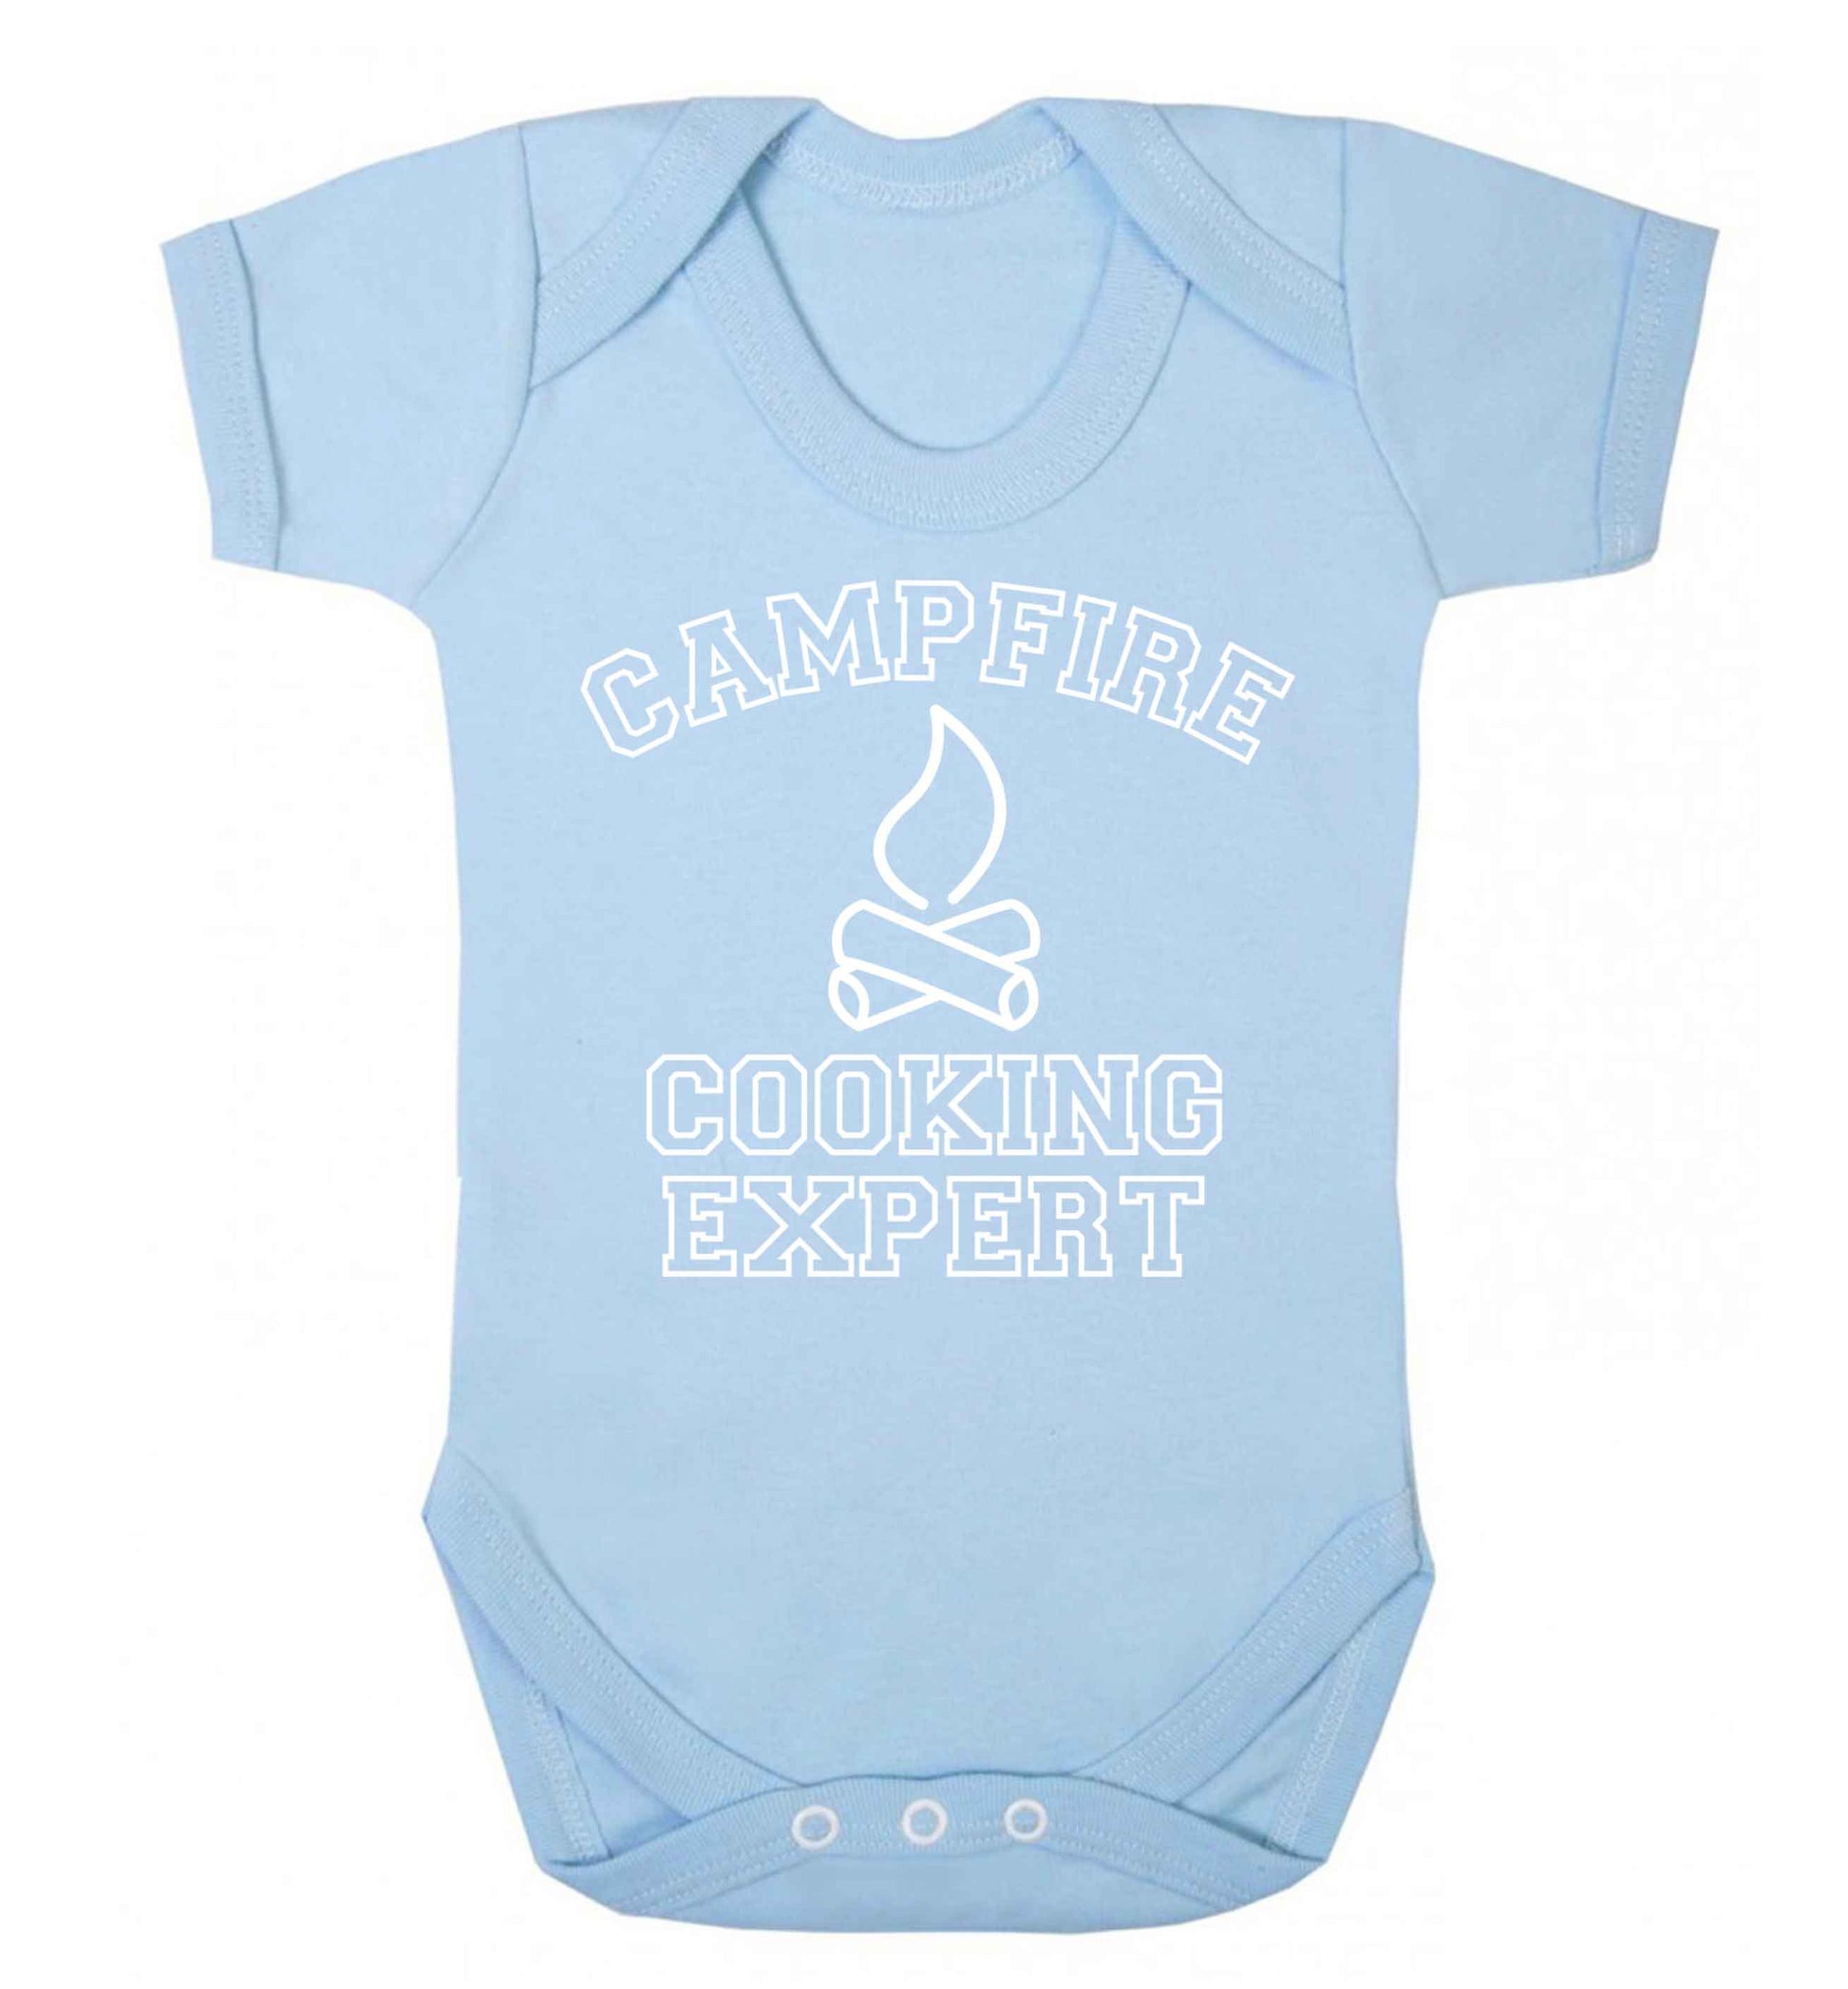 Campfire cooking expert Baby Vest pale blue 18-24 months